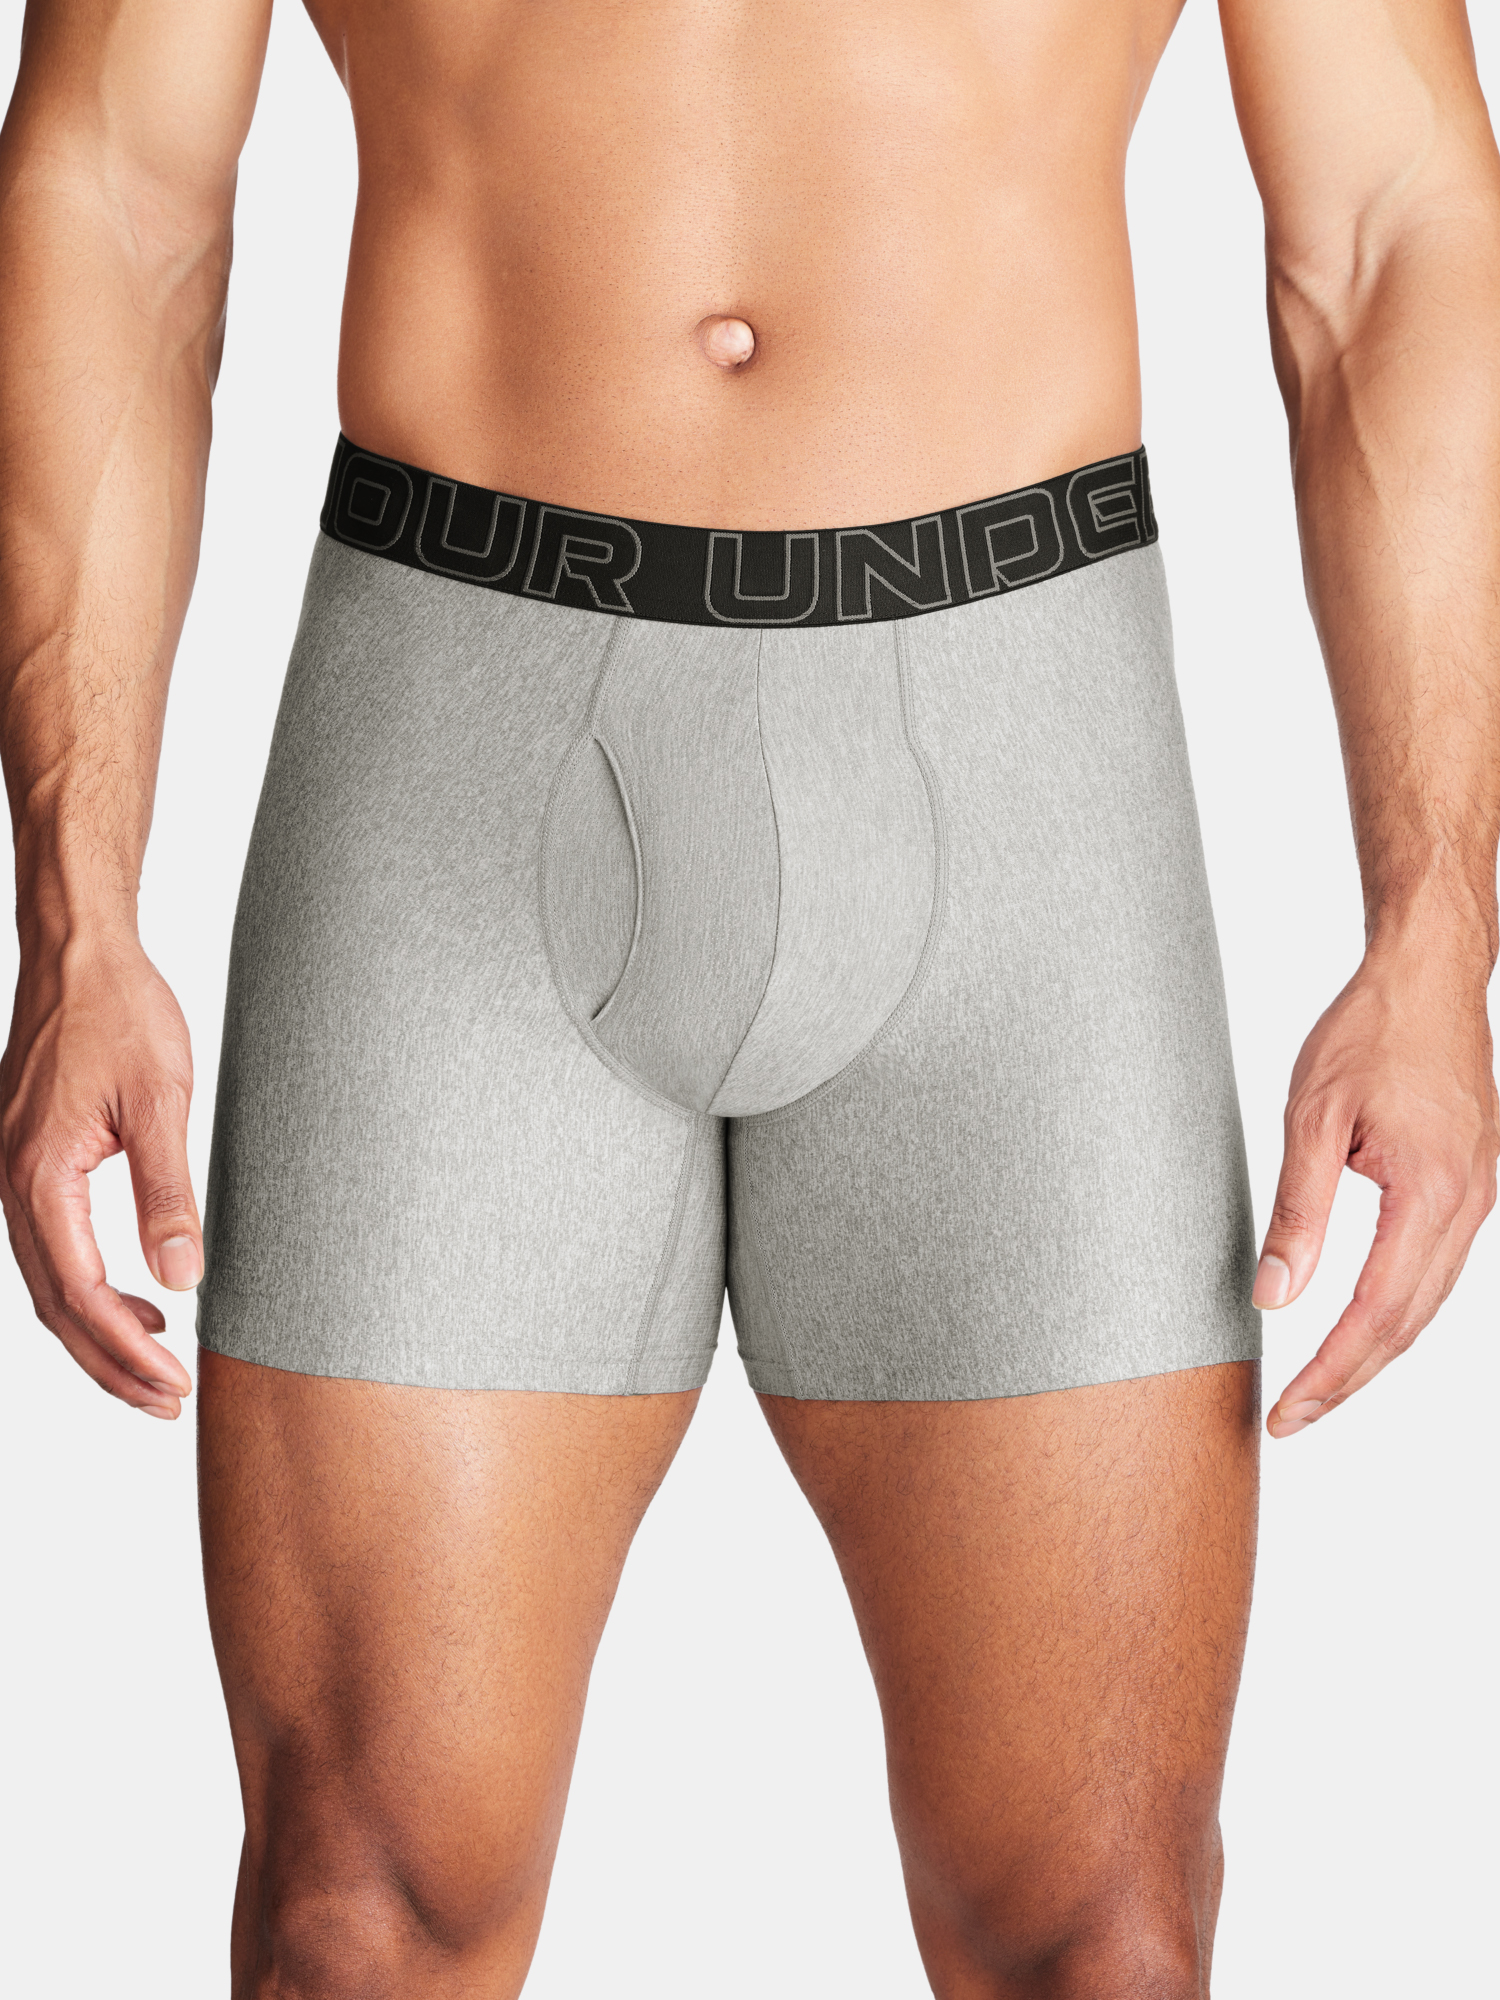 Under Armour Boxer Shorts M UA Perf Tech 6in-GRY - Men